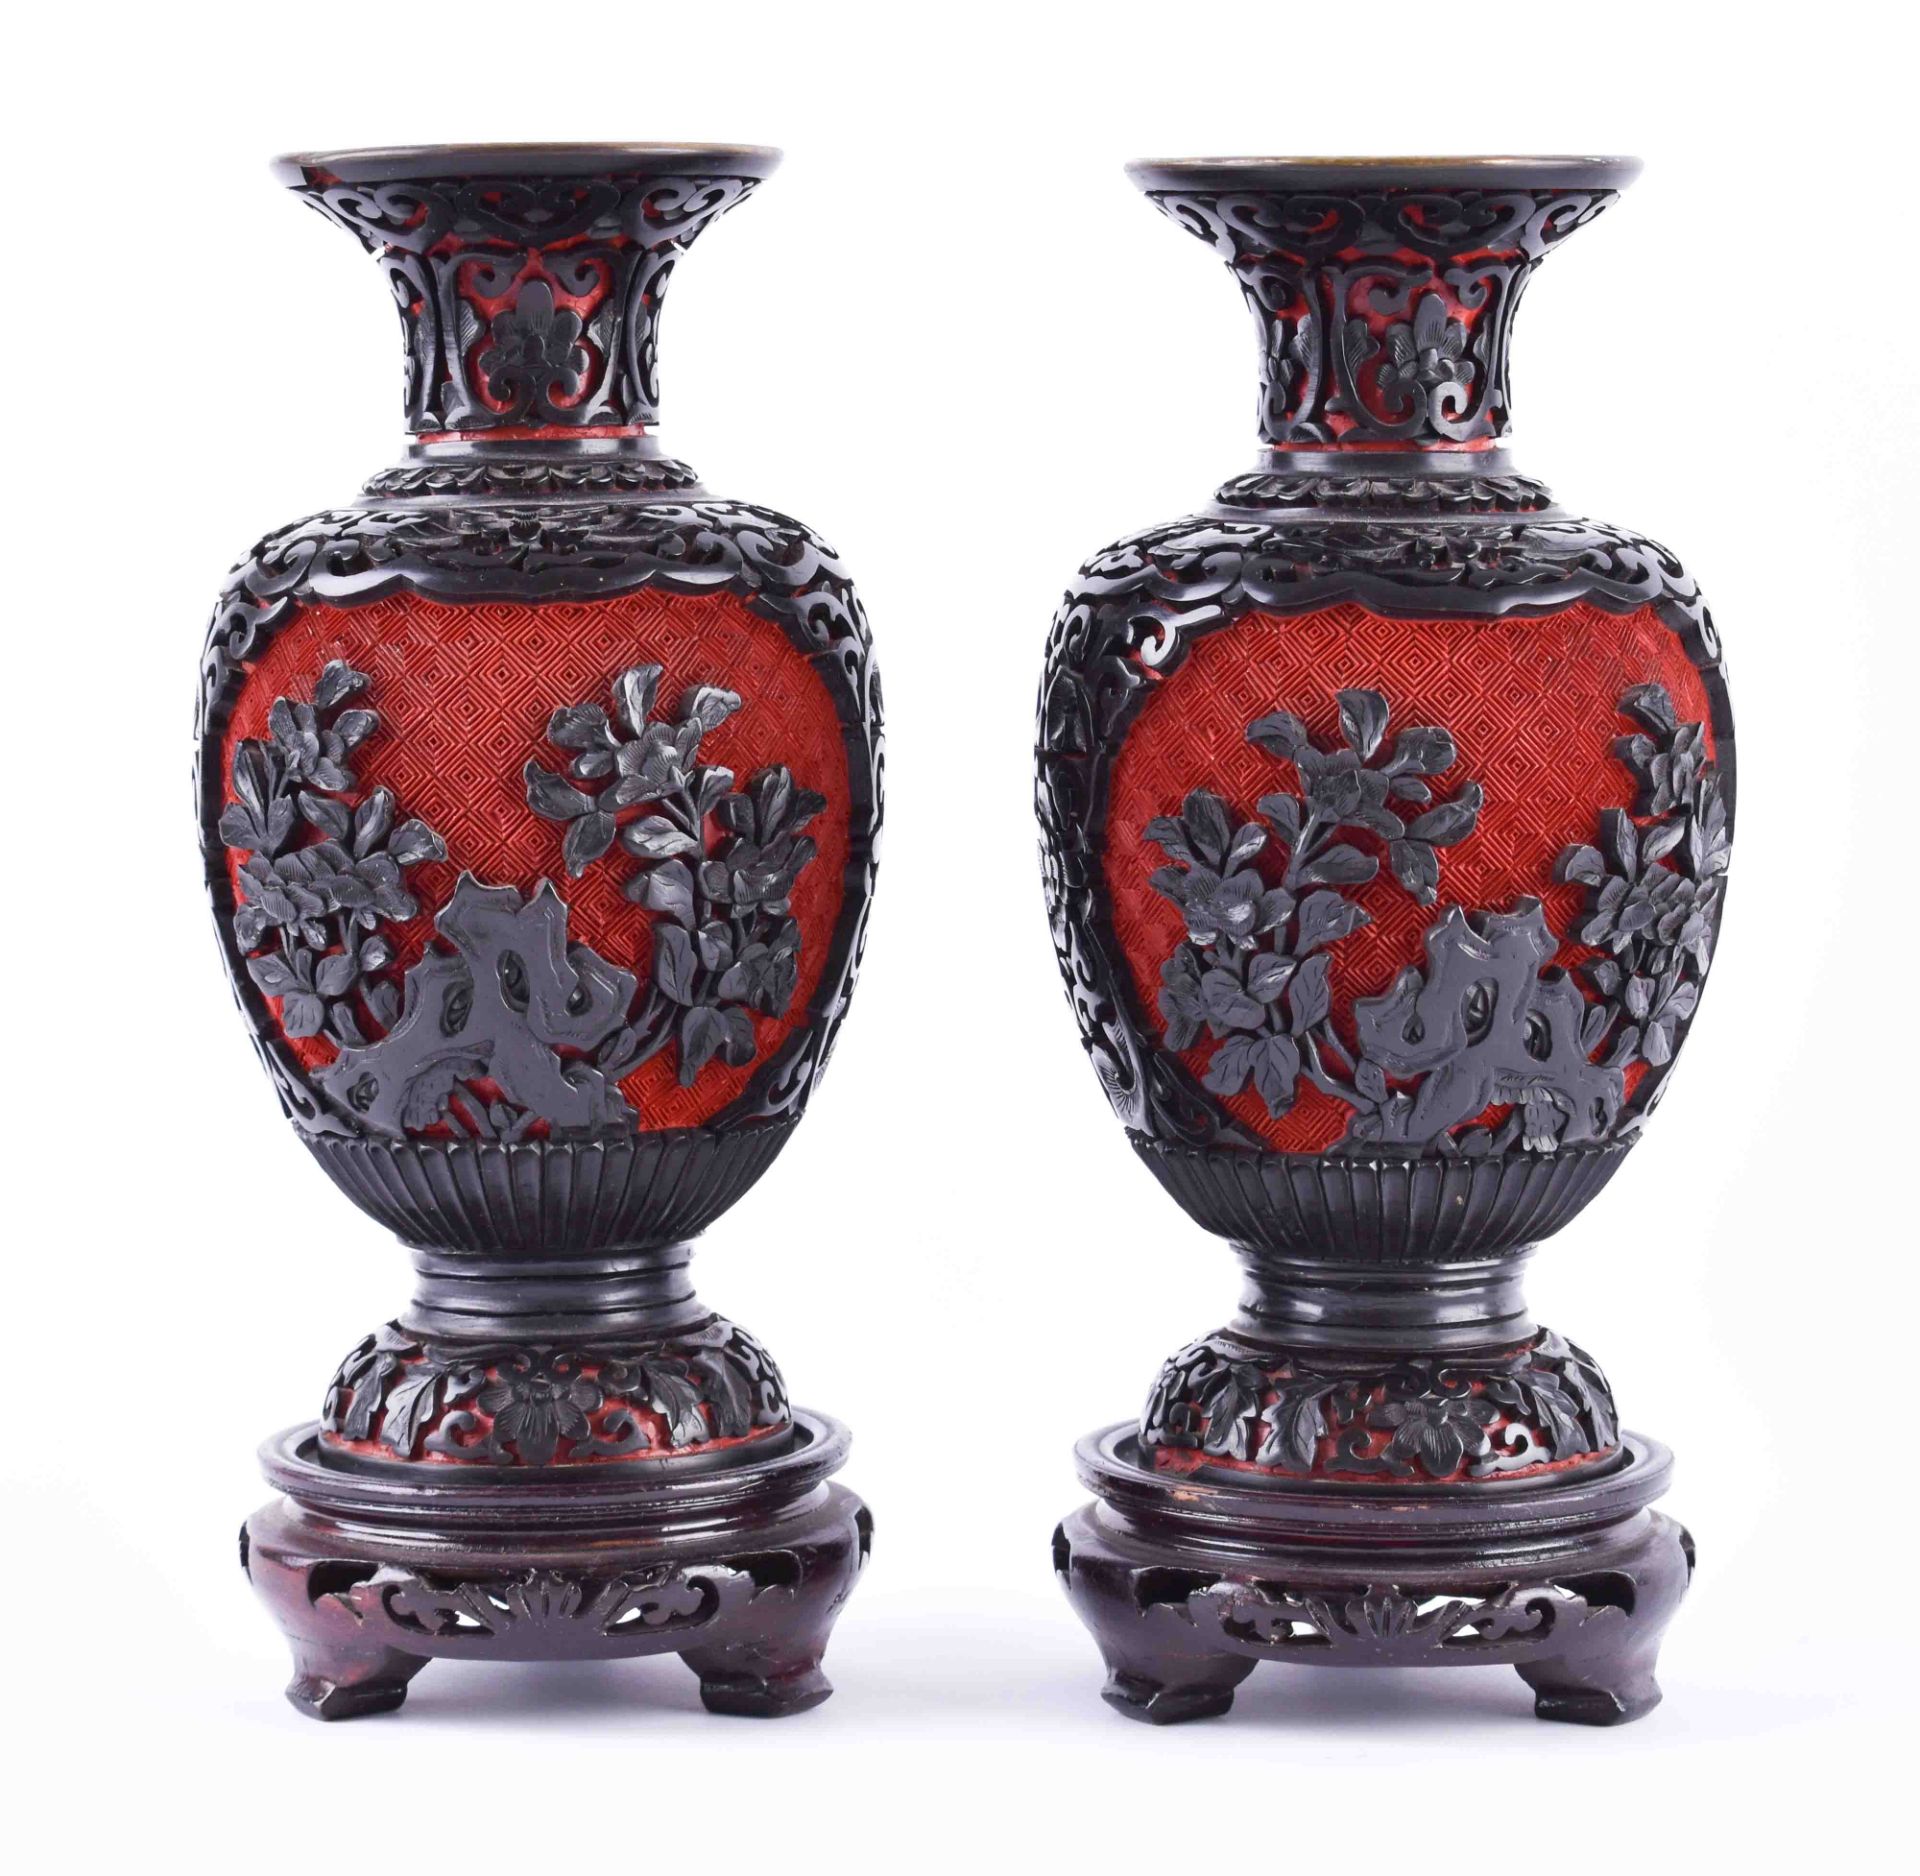 Pair of lacquer vases China 20th centuryeach standing on a wooden base, total height 21 cmPaar